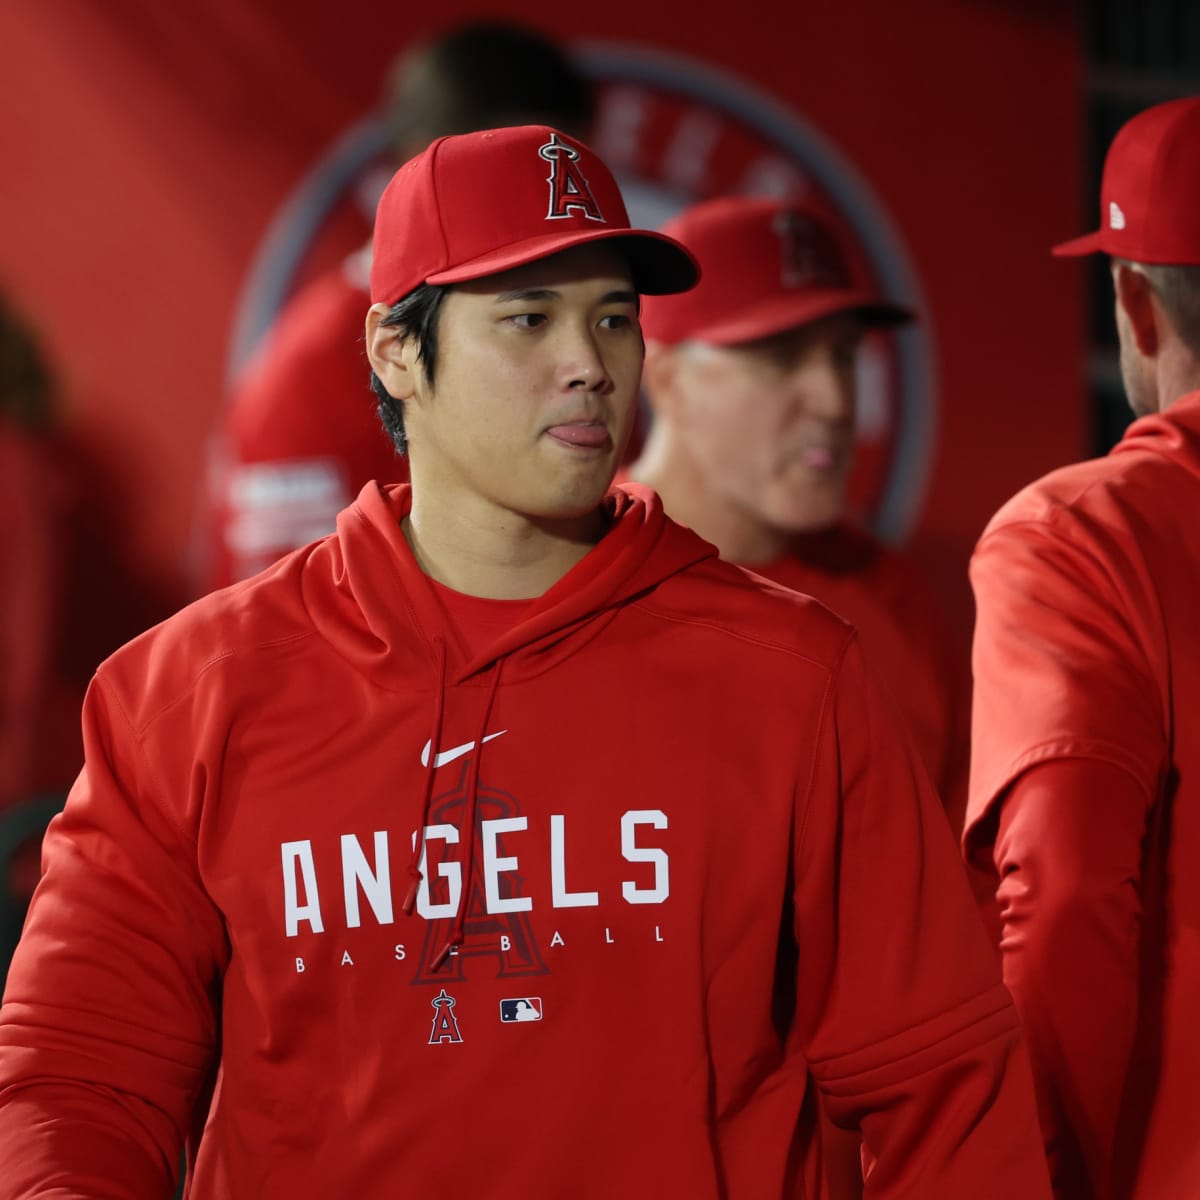 Shohei Ohtani MLB All-Star Game Jersey Receiving Bids for over